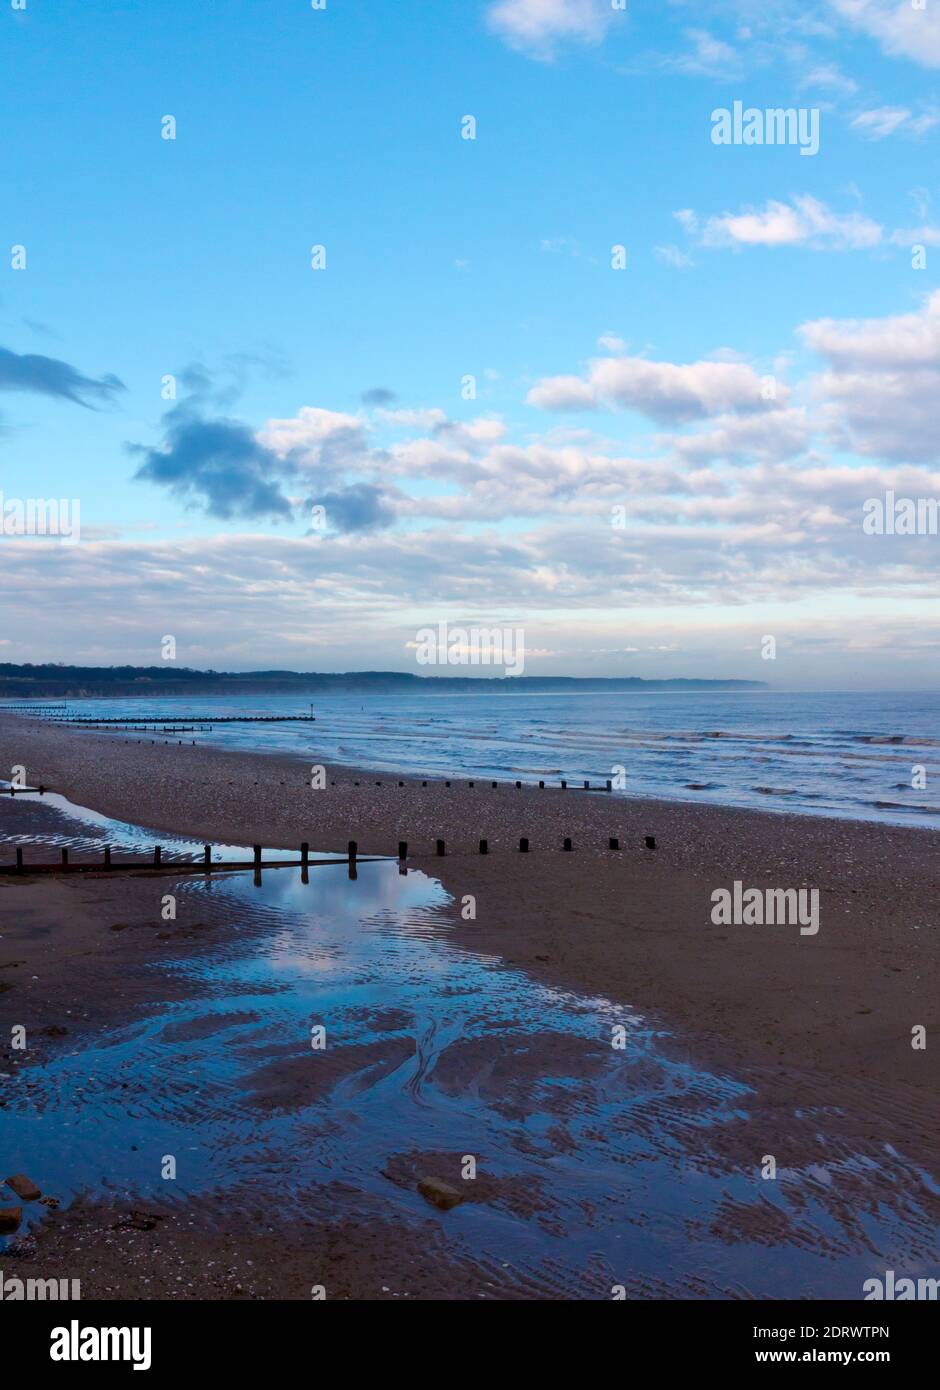 Winter view of the beach at Bridlington a popular seaside resort in the East Riding of Yorkshire England UK/ Stock Photo